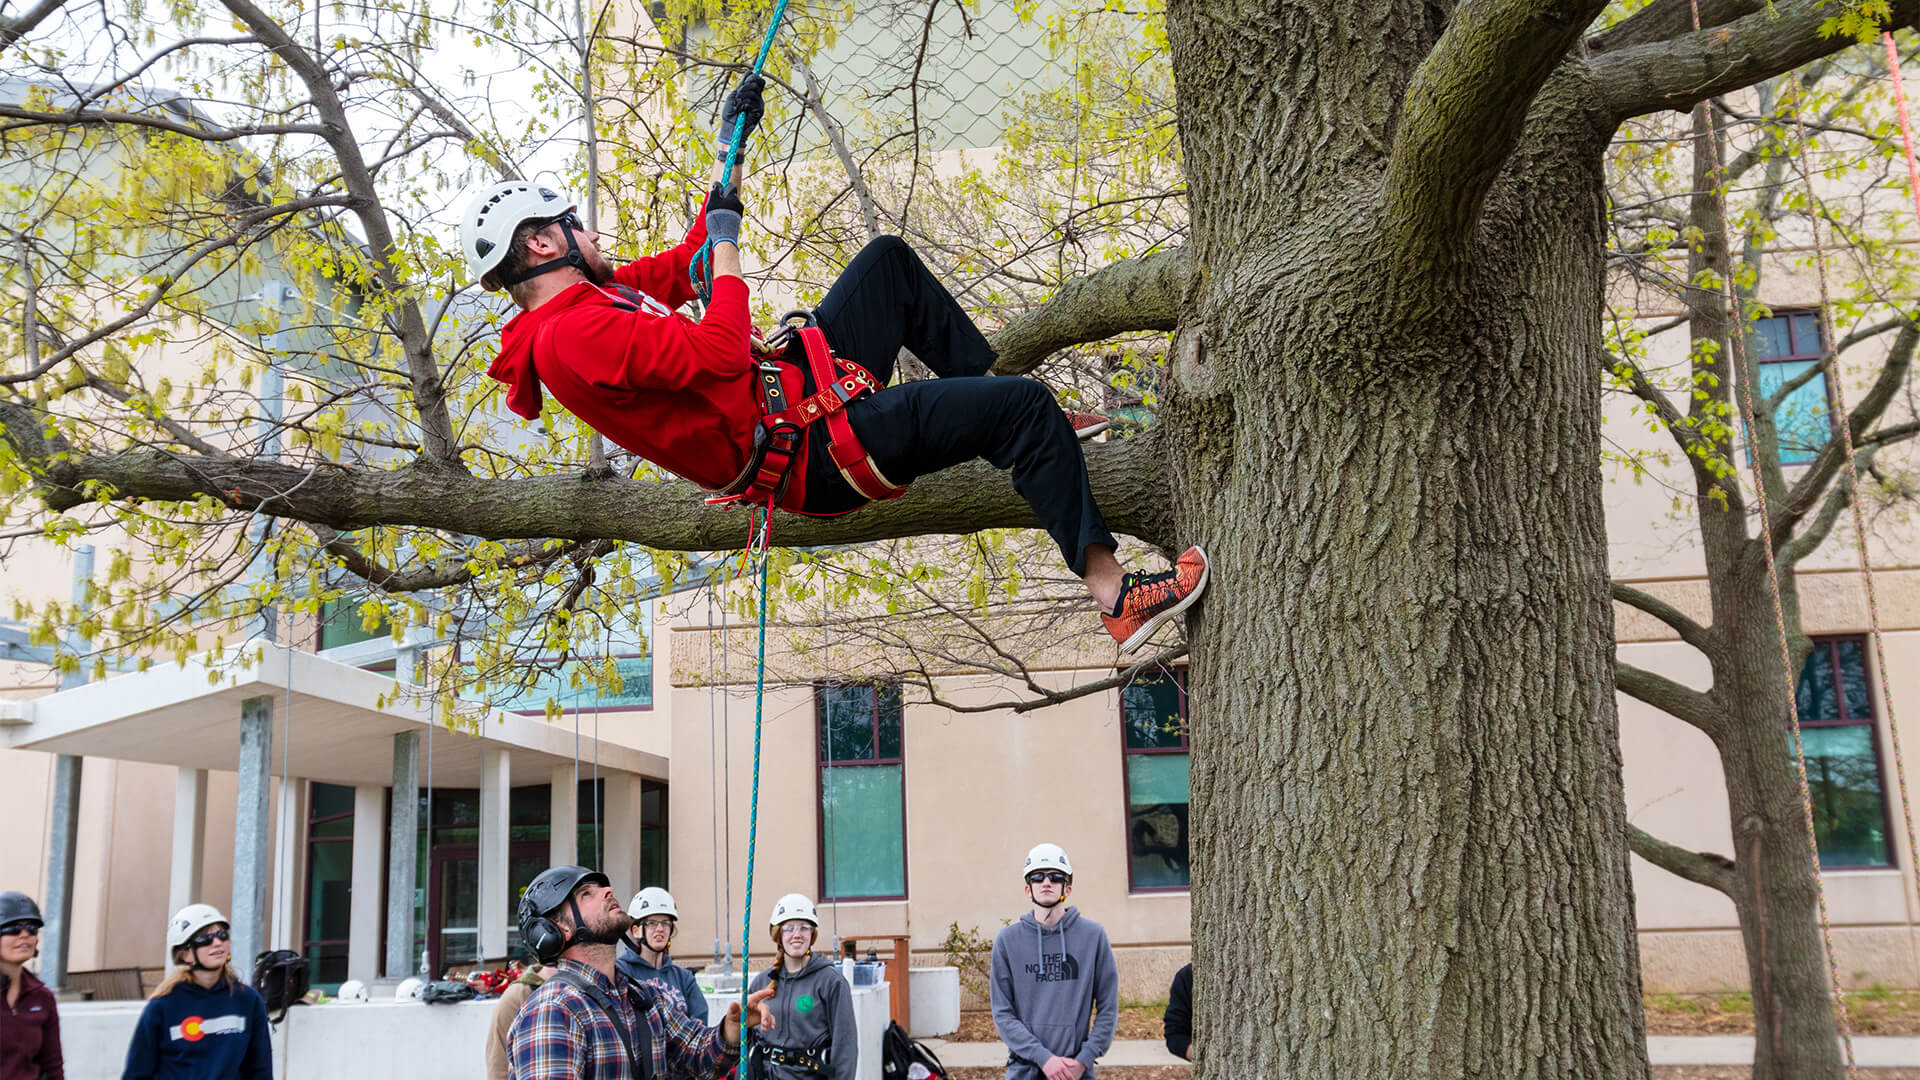 Student climing tree with rope harness while others watch